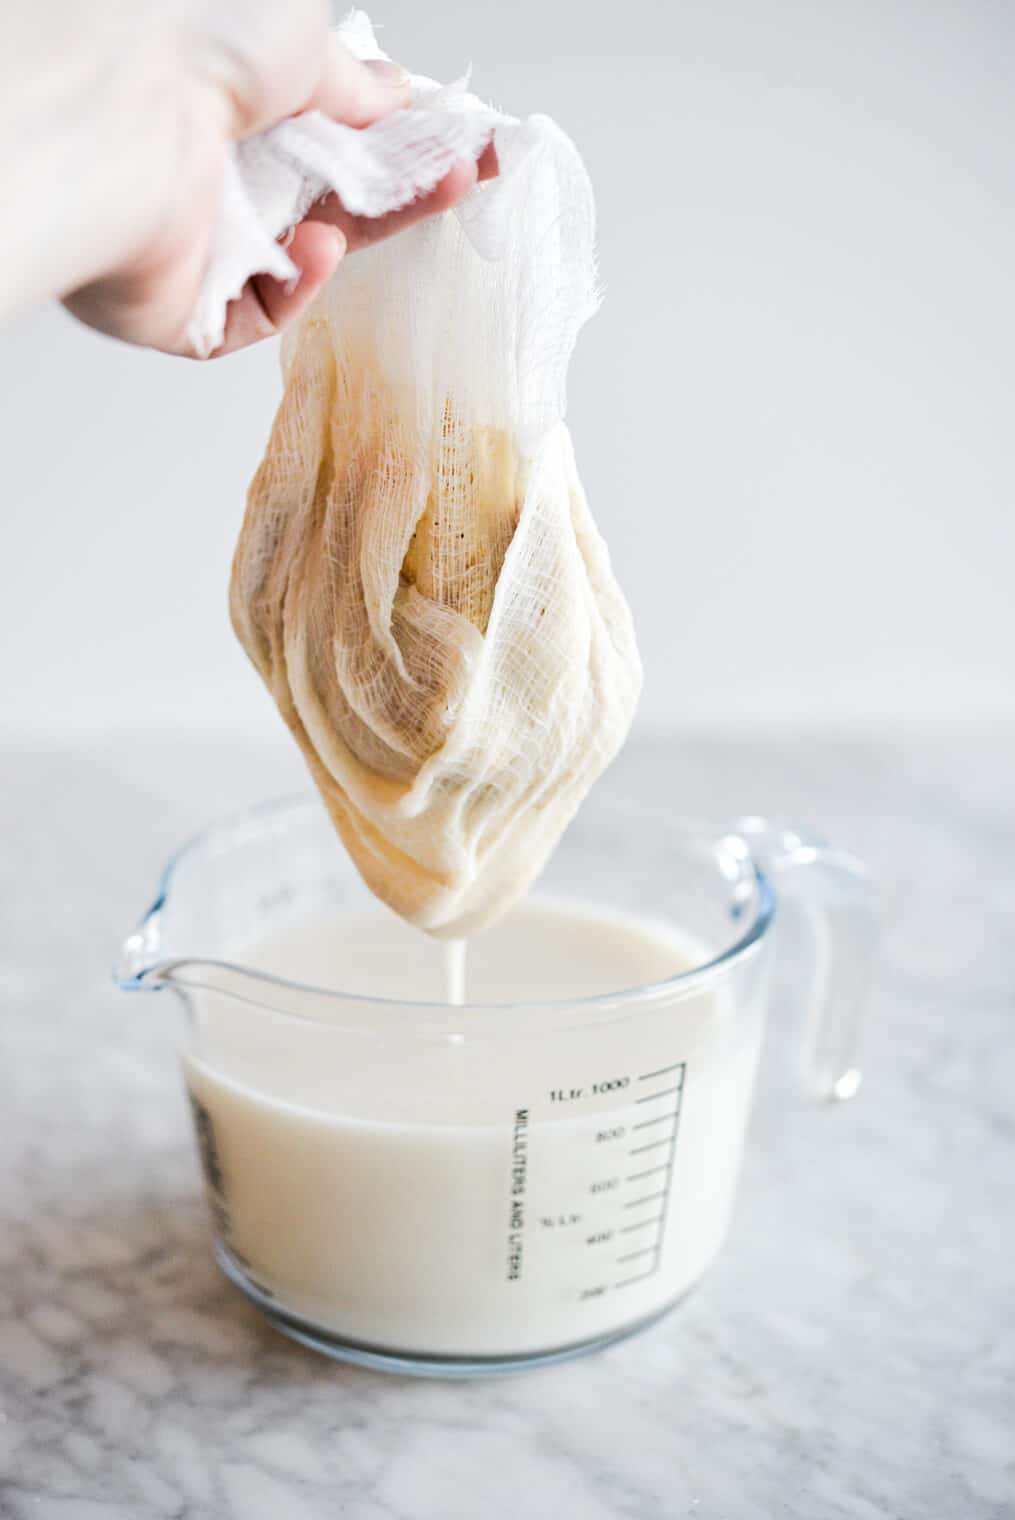 Cheese cloth with oats being held over measuring cup filled with oat milk straining from cheese cloth.